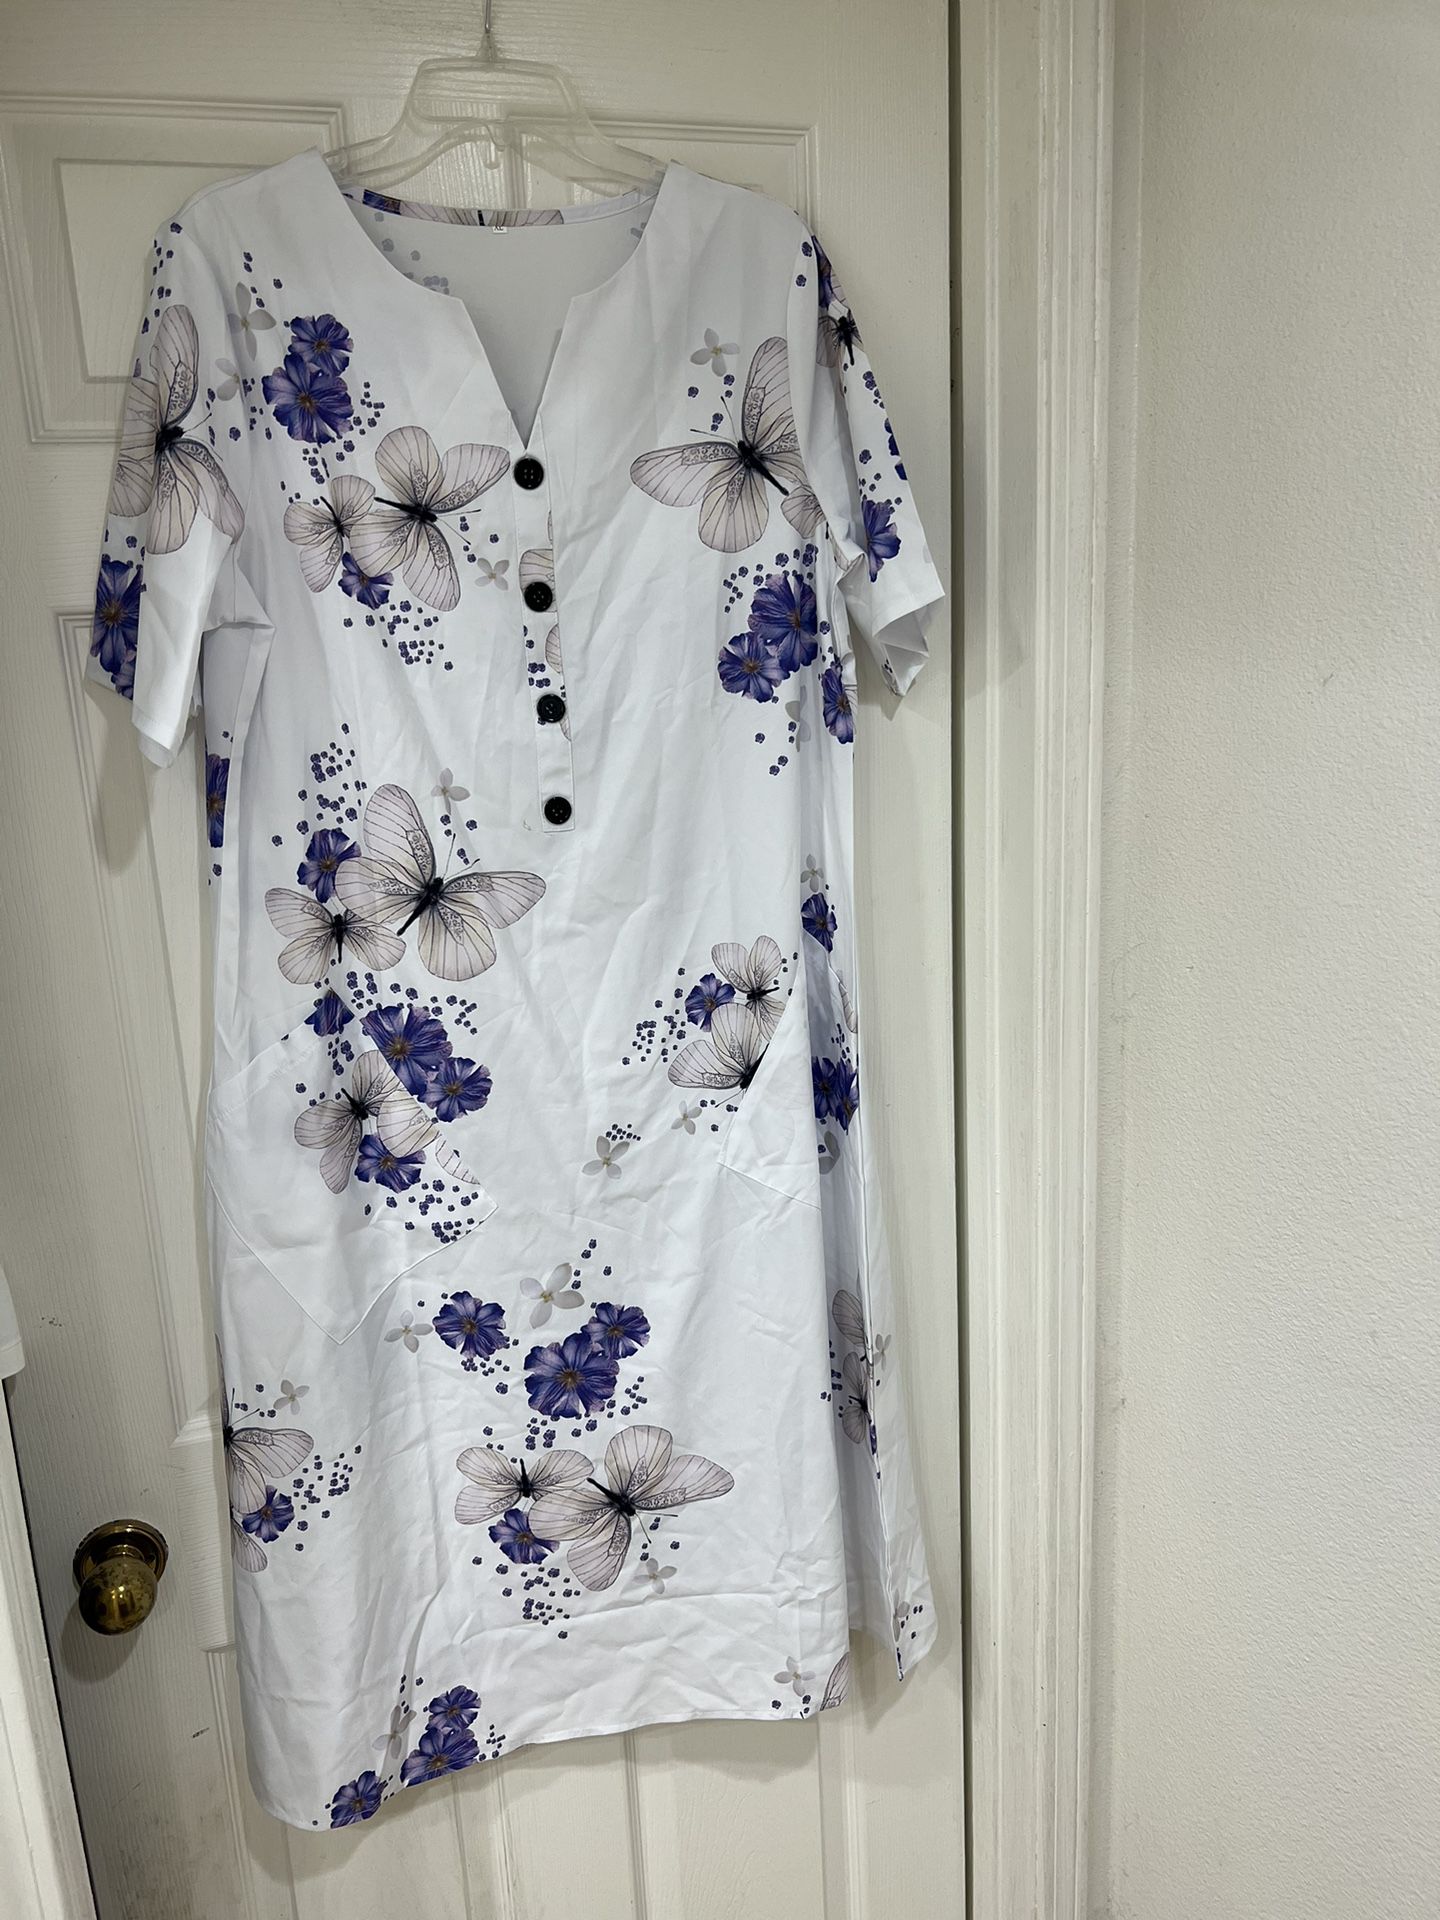 New White And Purple Floral Knee Length Dress